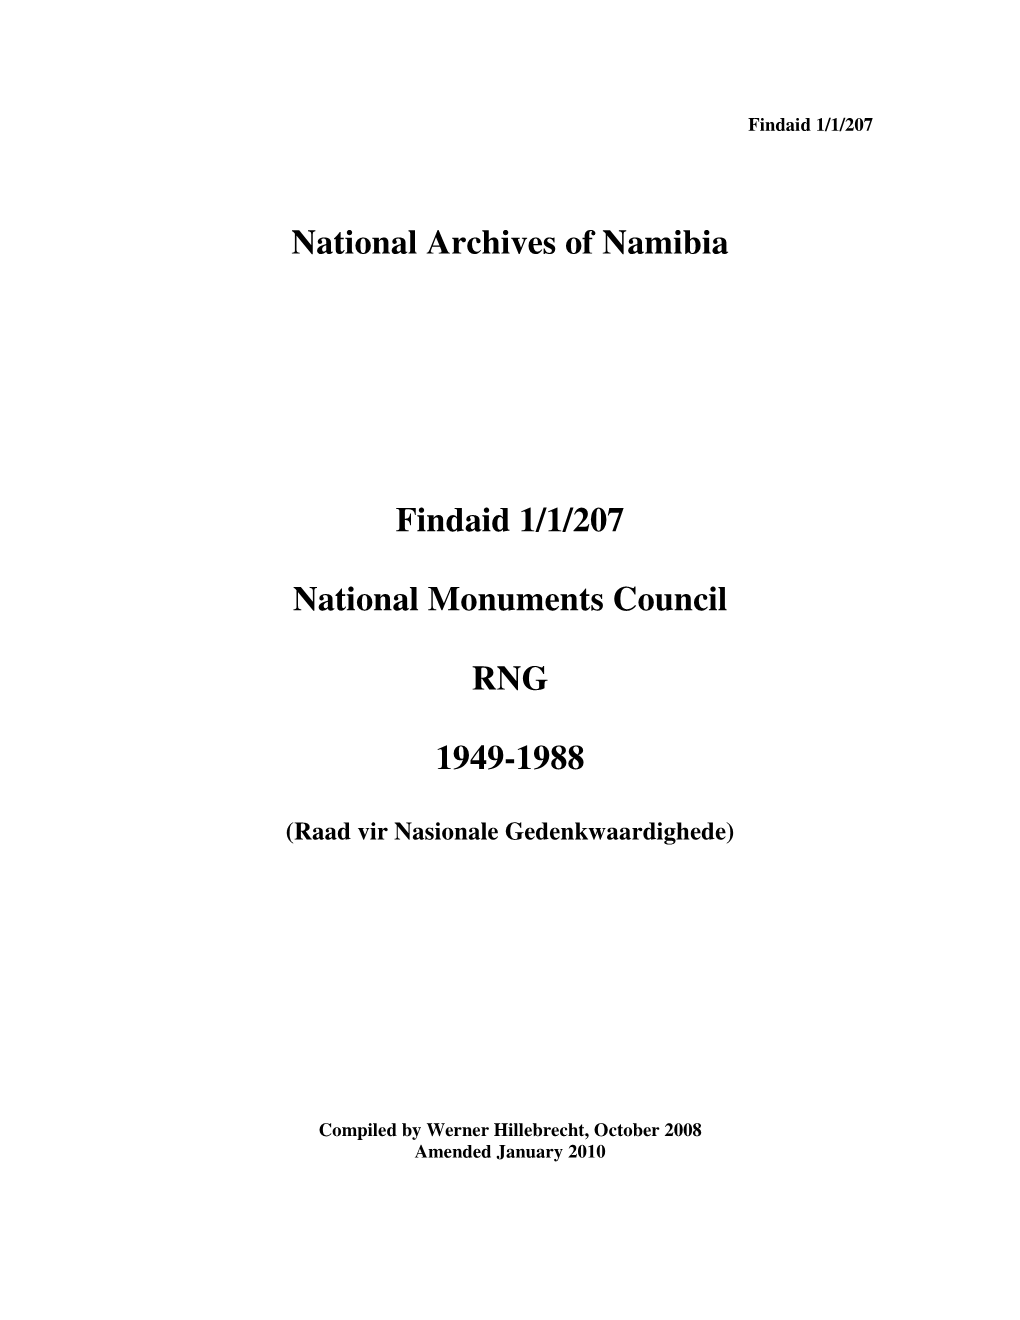 National Archives of Namibia Findaid 1/1/207 National Monuments